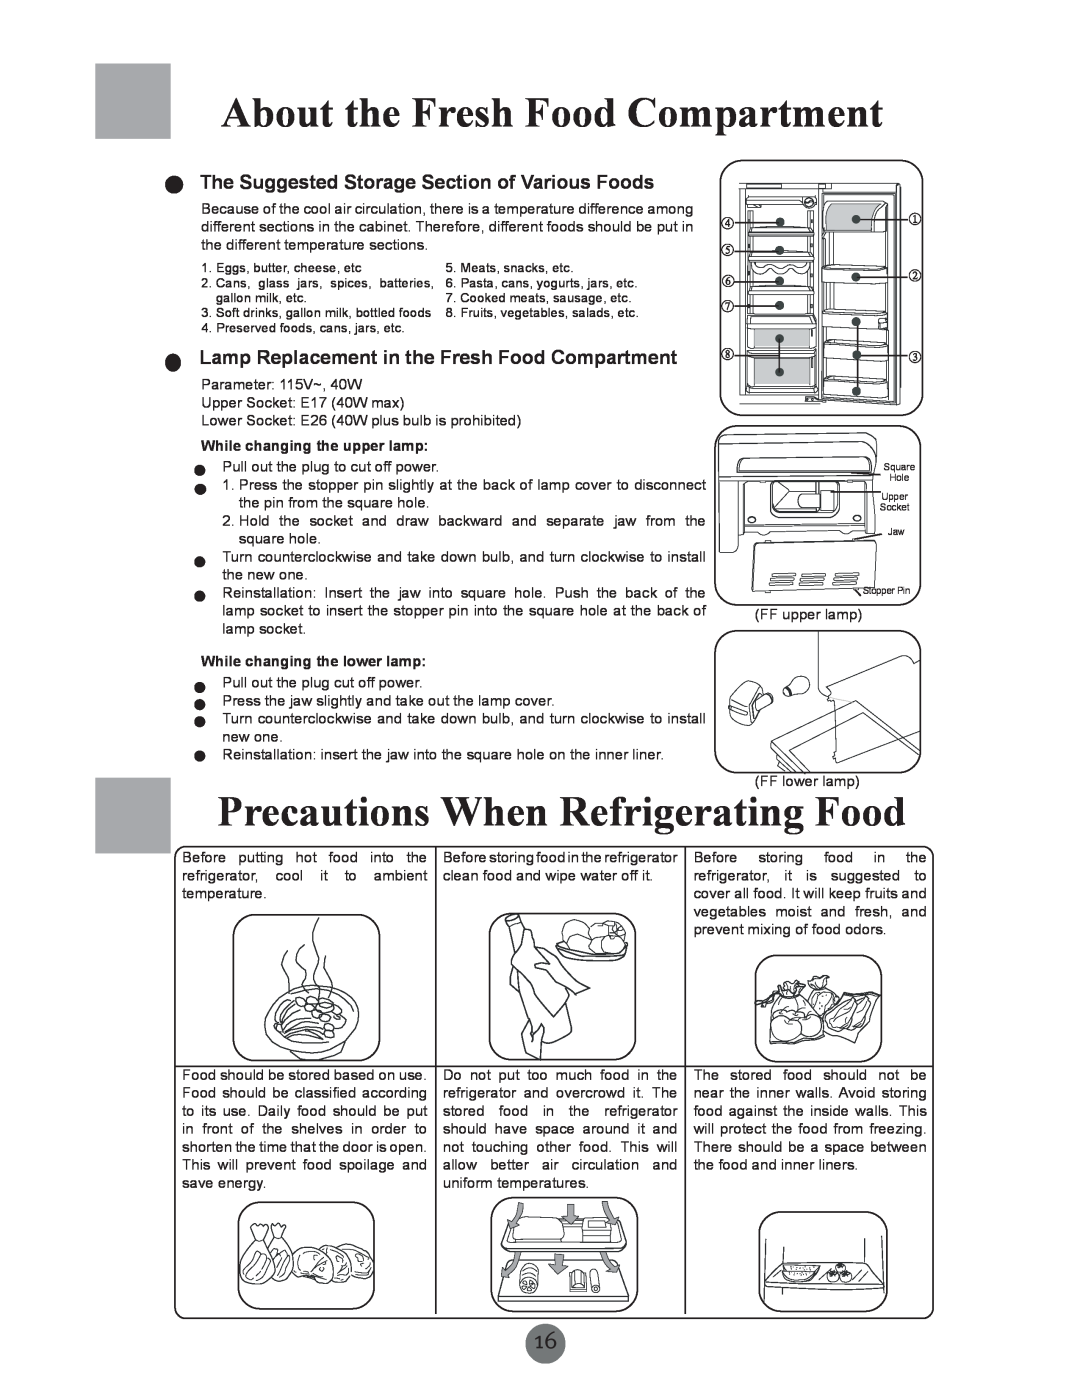 Haier RRCS25, PRCS25ED, PRCS25SD Precautions When Refrigerating Food, The Suggested Storage Section of Various Foods 